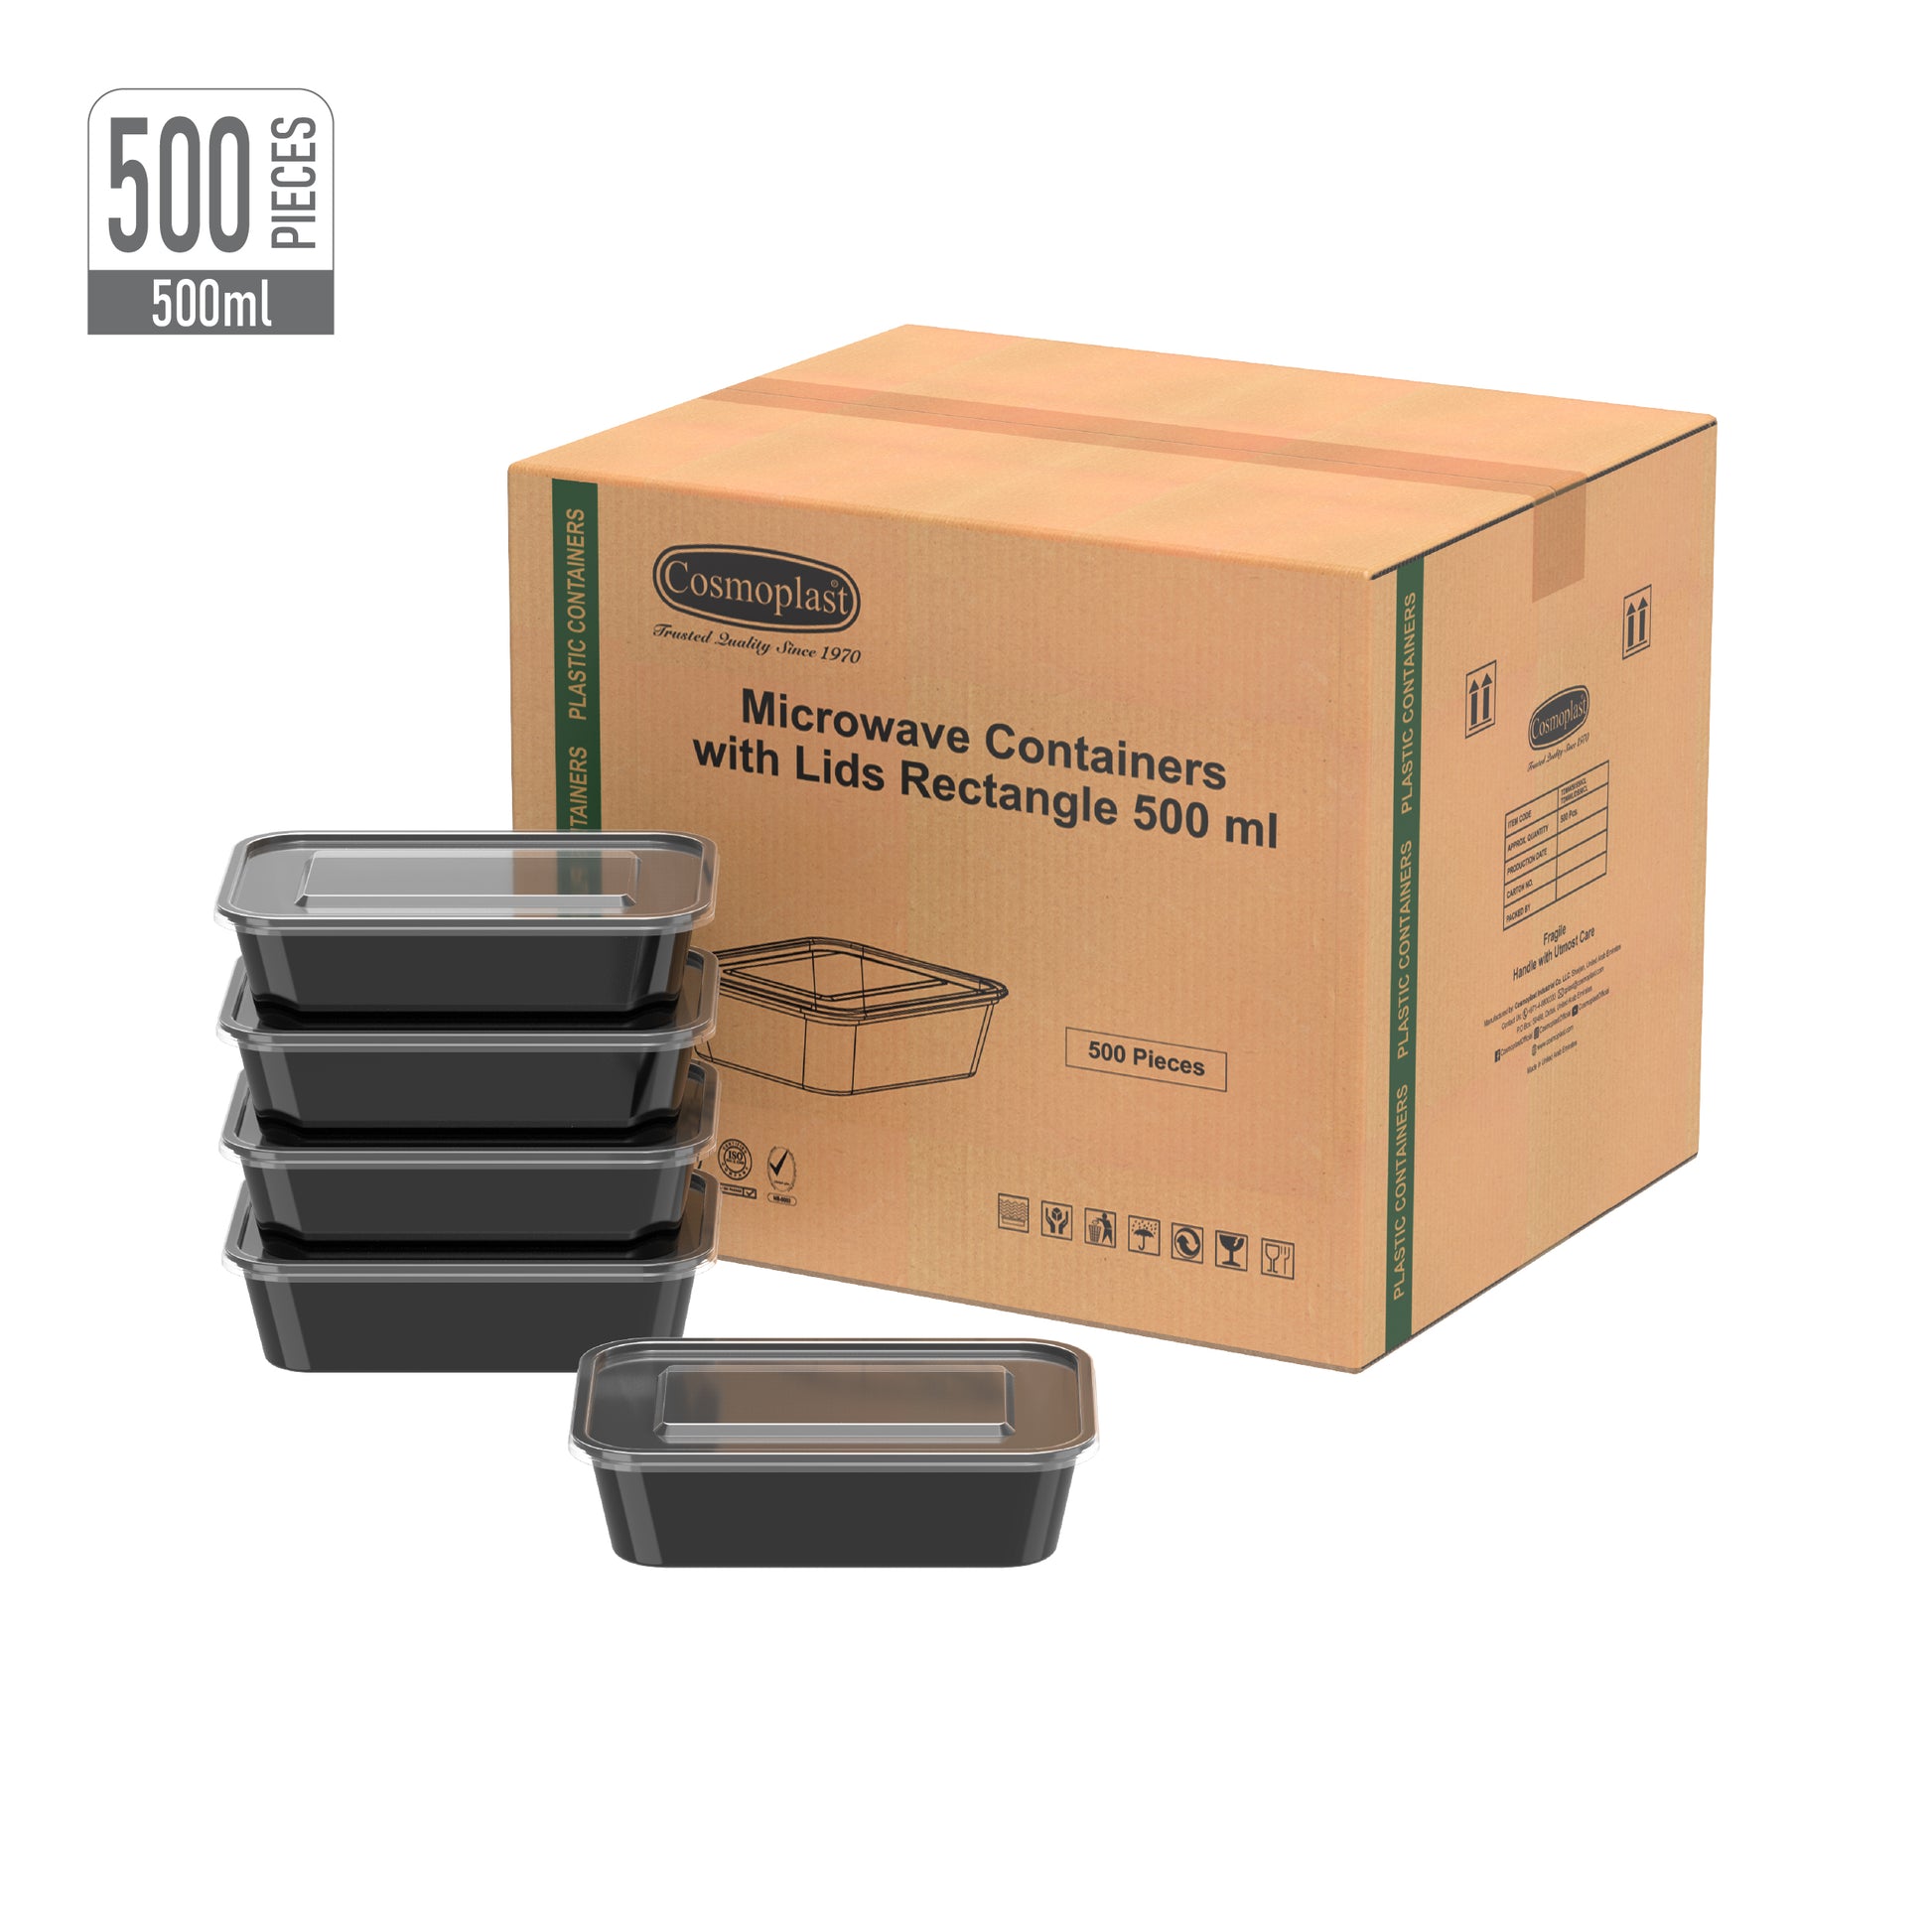 Black Microwave Containers with Clear Lids